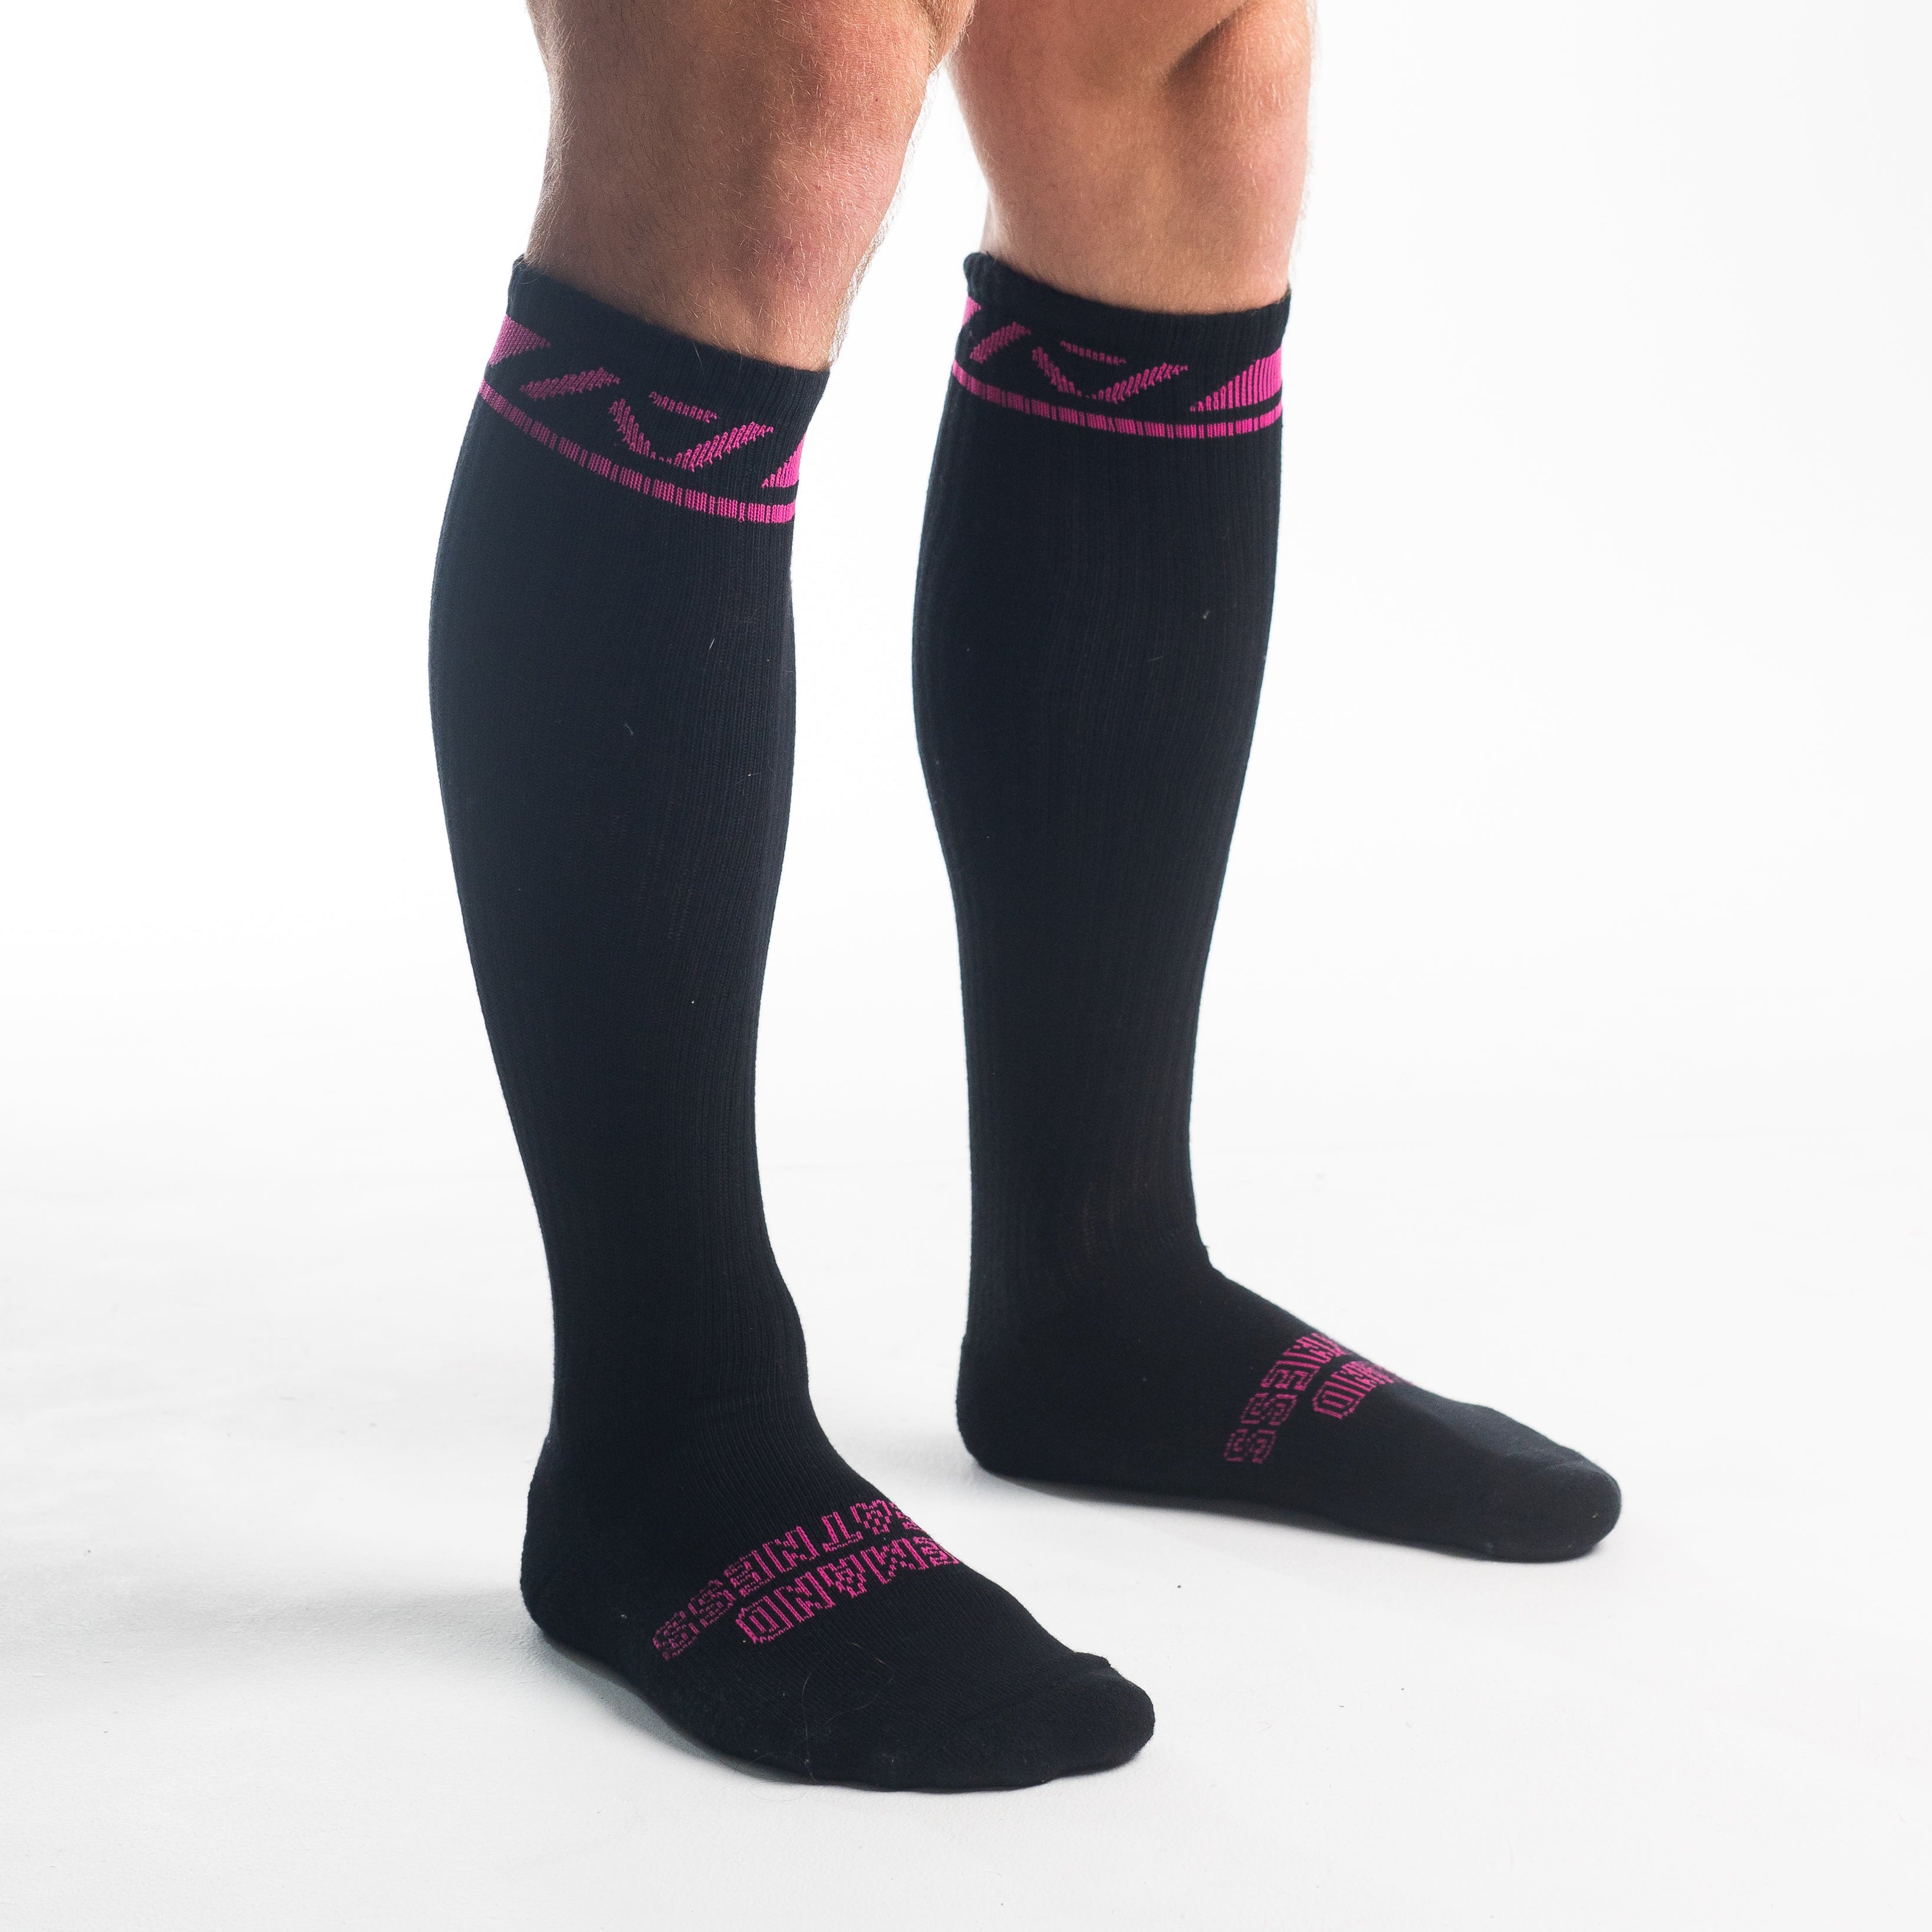 A7 Flamingo deadlift socks are designed specifically for pulls and keep your shins protected from scrapes. A7 deadlift socks are a perfect pair to wear in training or powerlifting competition. The A7 IPF Approved Kit includes Powerlifting Singlet, A7 Meet Shirt, A7 Zebra Wrist Wraps, A7 Deadlift Socks, Hourglass Knee Sleeves (Stiff Knee Sleeves and Rigor Mortis Knee Sleeves). All A7 Powerlifting Equipment shipping to UK, Norway, Switzerland and Iceland.